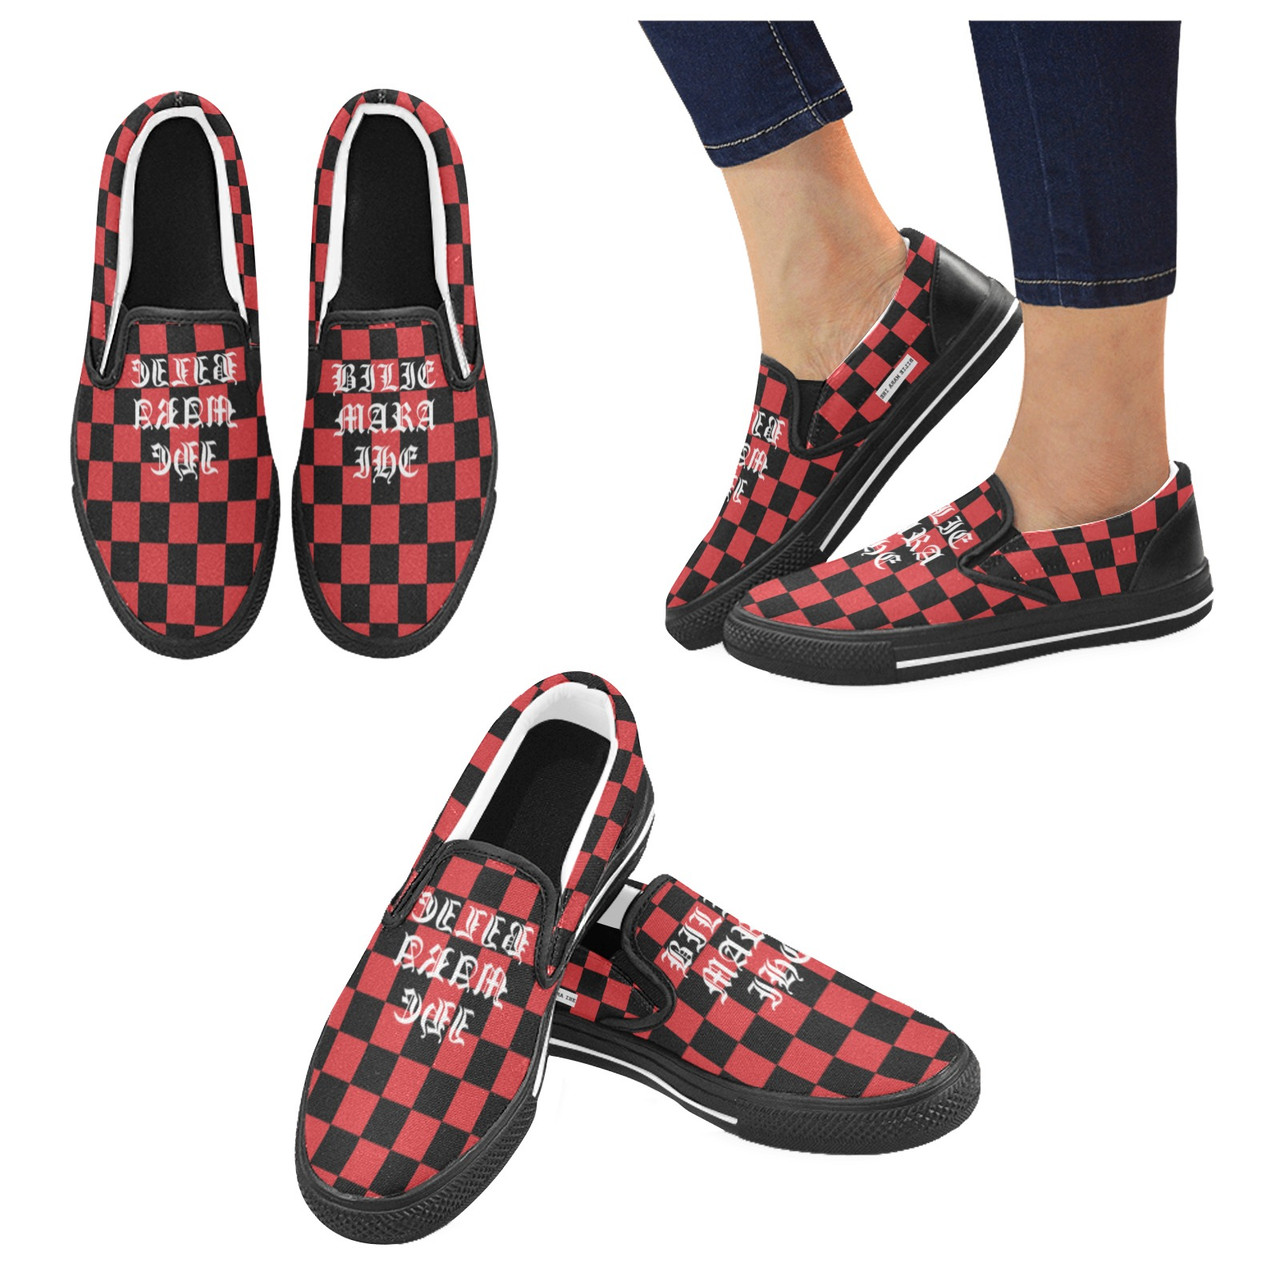 Red Chess Pattern - Men's Slip-on Canvas Shoes - Bilie Mara Ihe